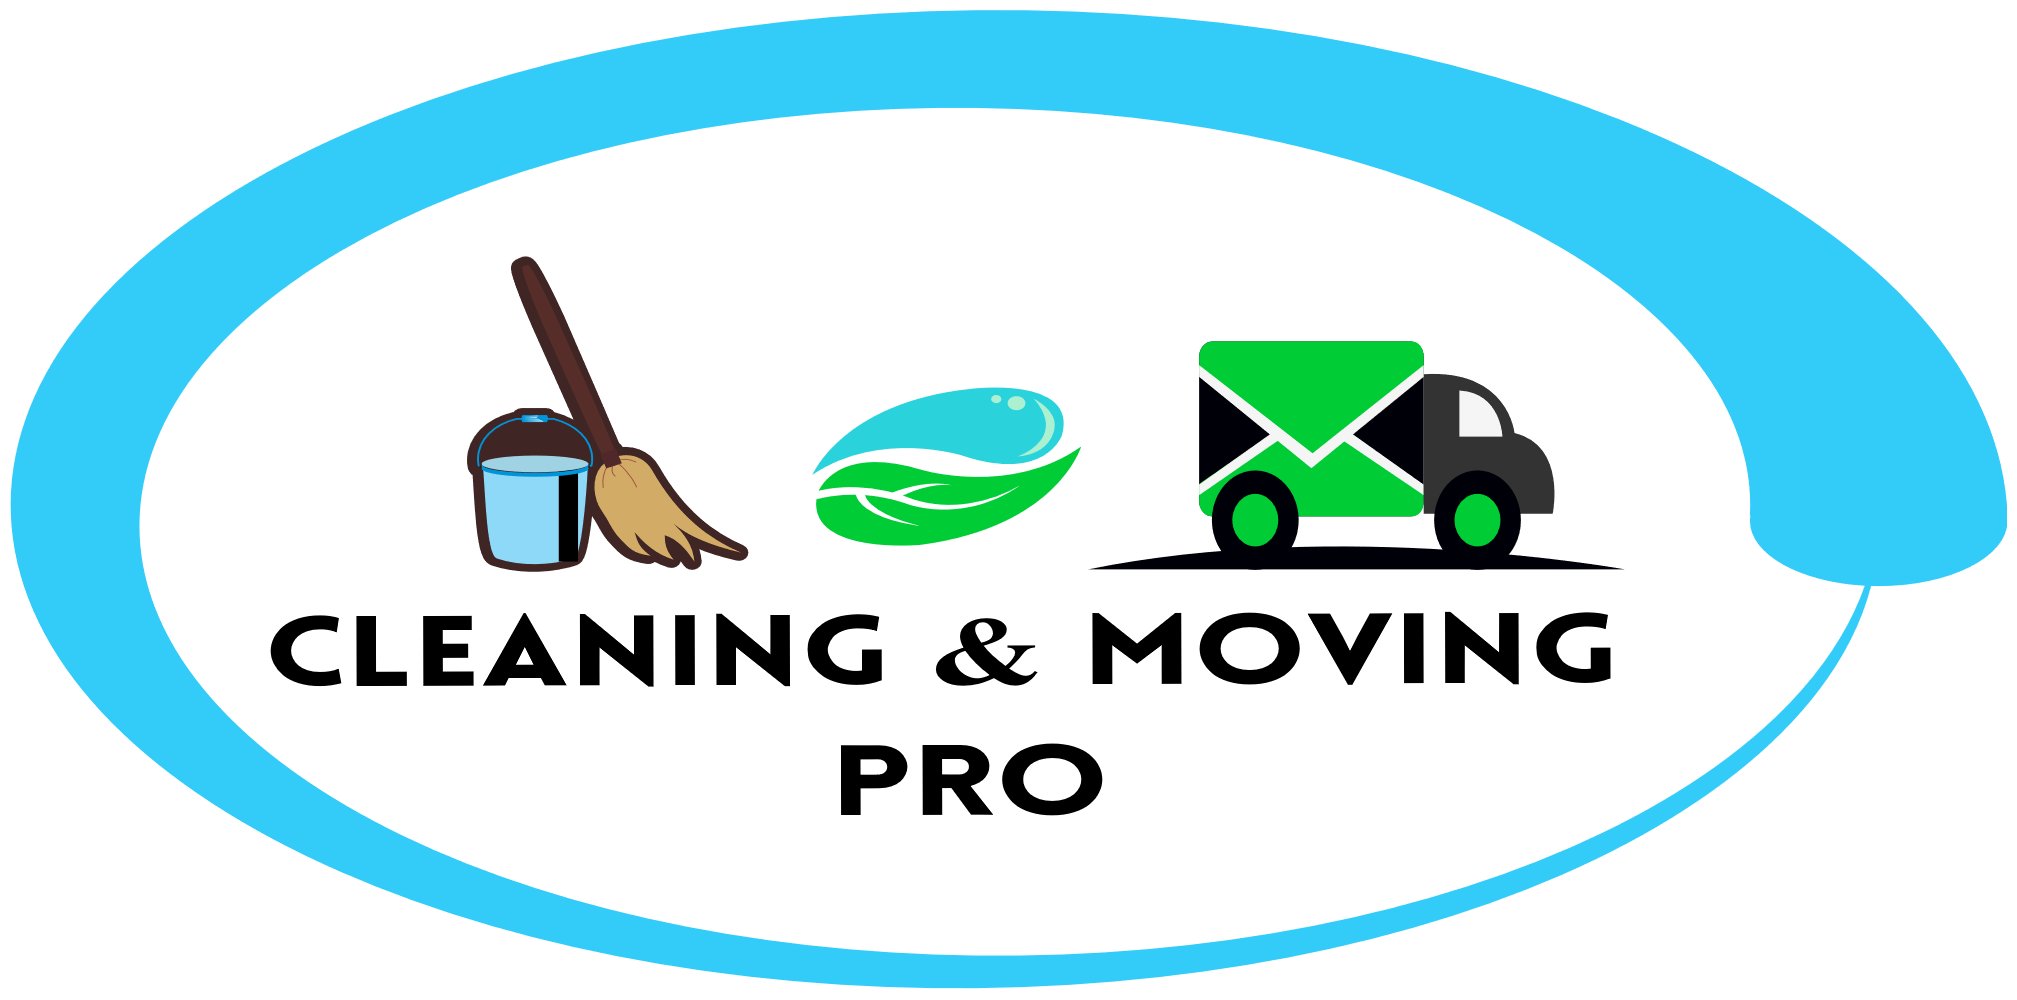 Dublin Cleaning / Professional Cleaning Services in Dublin.-CLEANING AND MOVING PRO